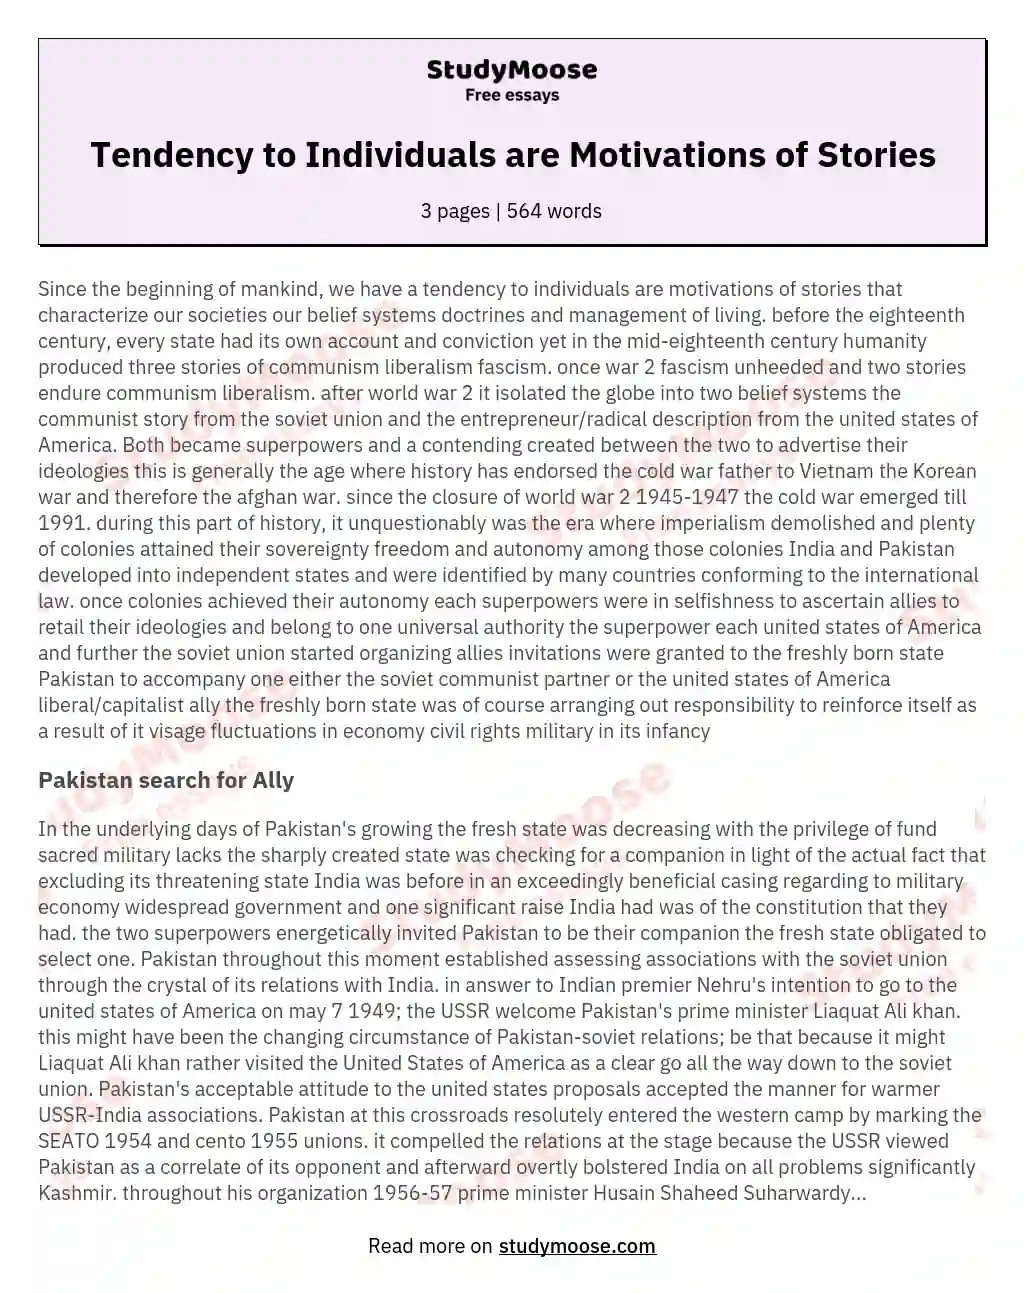 Tendency to Individuals are Motivations of Stories essay